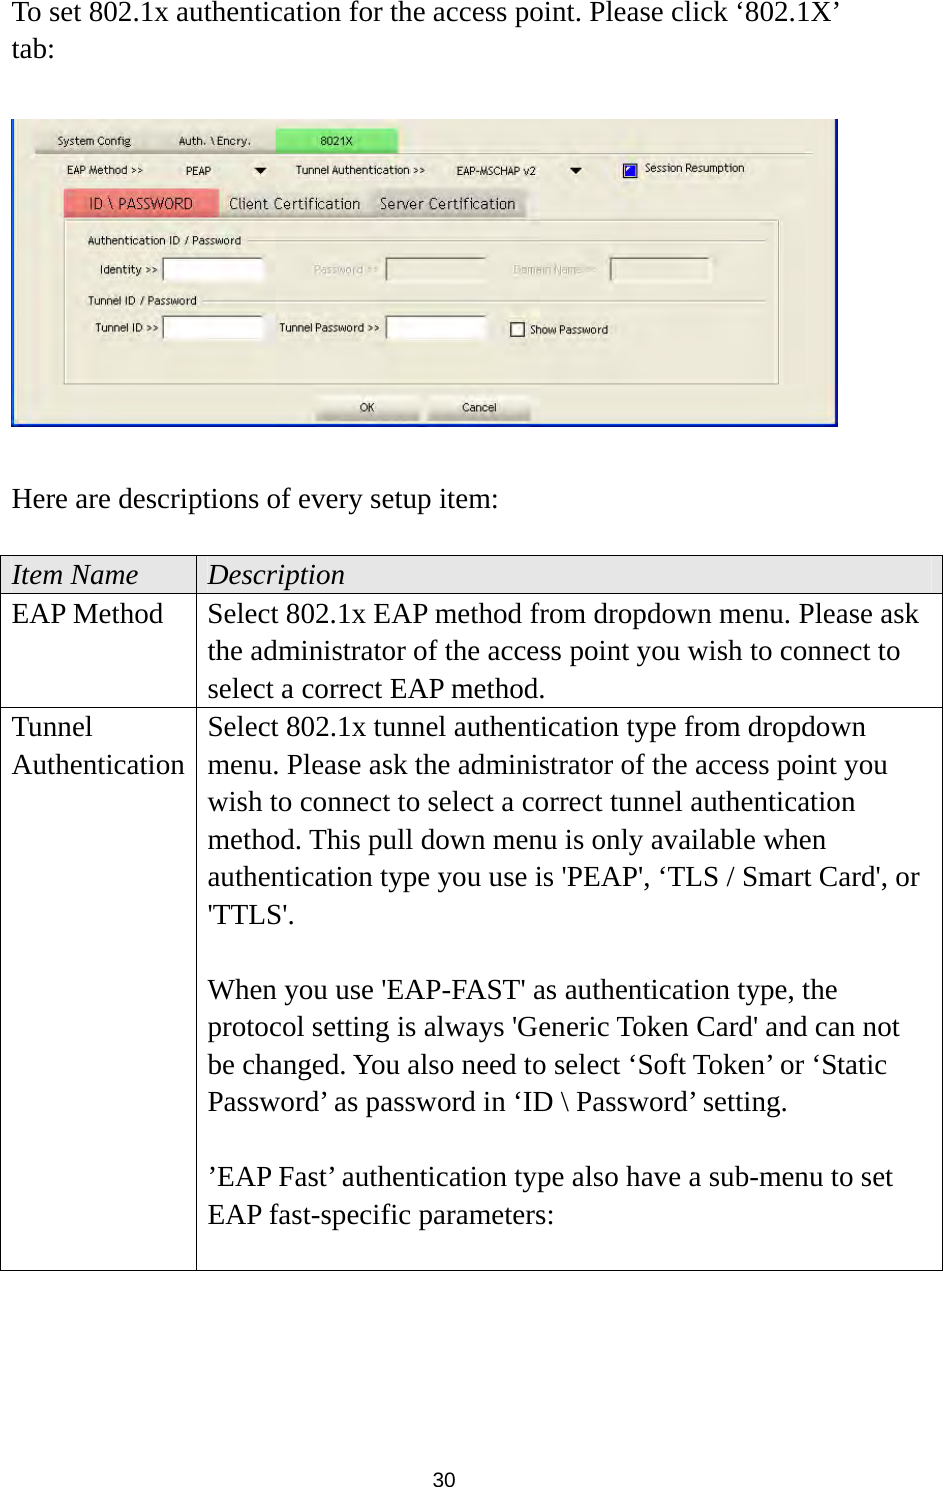  30 To set 802.1x authentication for the access point. Please click ‘802.1X’ tab:    Here are descriptions of every setup item:  Item Name  Description EAP Method  Select 802.1x EAP method from dropdown menu. Please ask the administrator of the access point you wish to connect to select a correct EAP method. Tunnel Authentication Select 802.1x tunnel authentication type from dropdown menu. Please ask the administrator of the access point you wish to connect to select a correct tunnel authentication method. This pull down menu is only available when authentication type you use is &apos;PEAP&apos;, ‘TLS / Smart Card&apos;, or &apos;TTLS&apos;.   When you use &apos;EAP-FAST&apos; as authentication type, the protocol setting is always &apos;Generic Token Card&apos; and can not be changed. You also need to select ‘Soft Token’ or ‘Static Password’ as password in ‘ID \ Password’ setting.  ’EAP Fast’ authentication type also have a sub-menu to set EAP fast-specific parameters:  